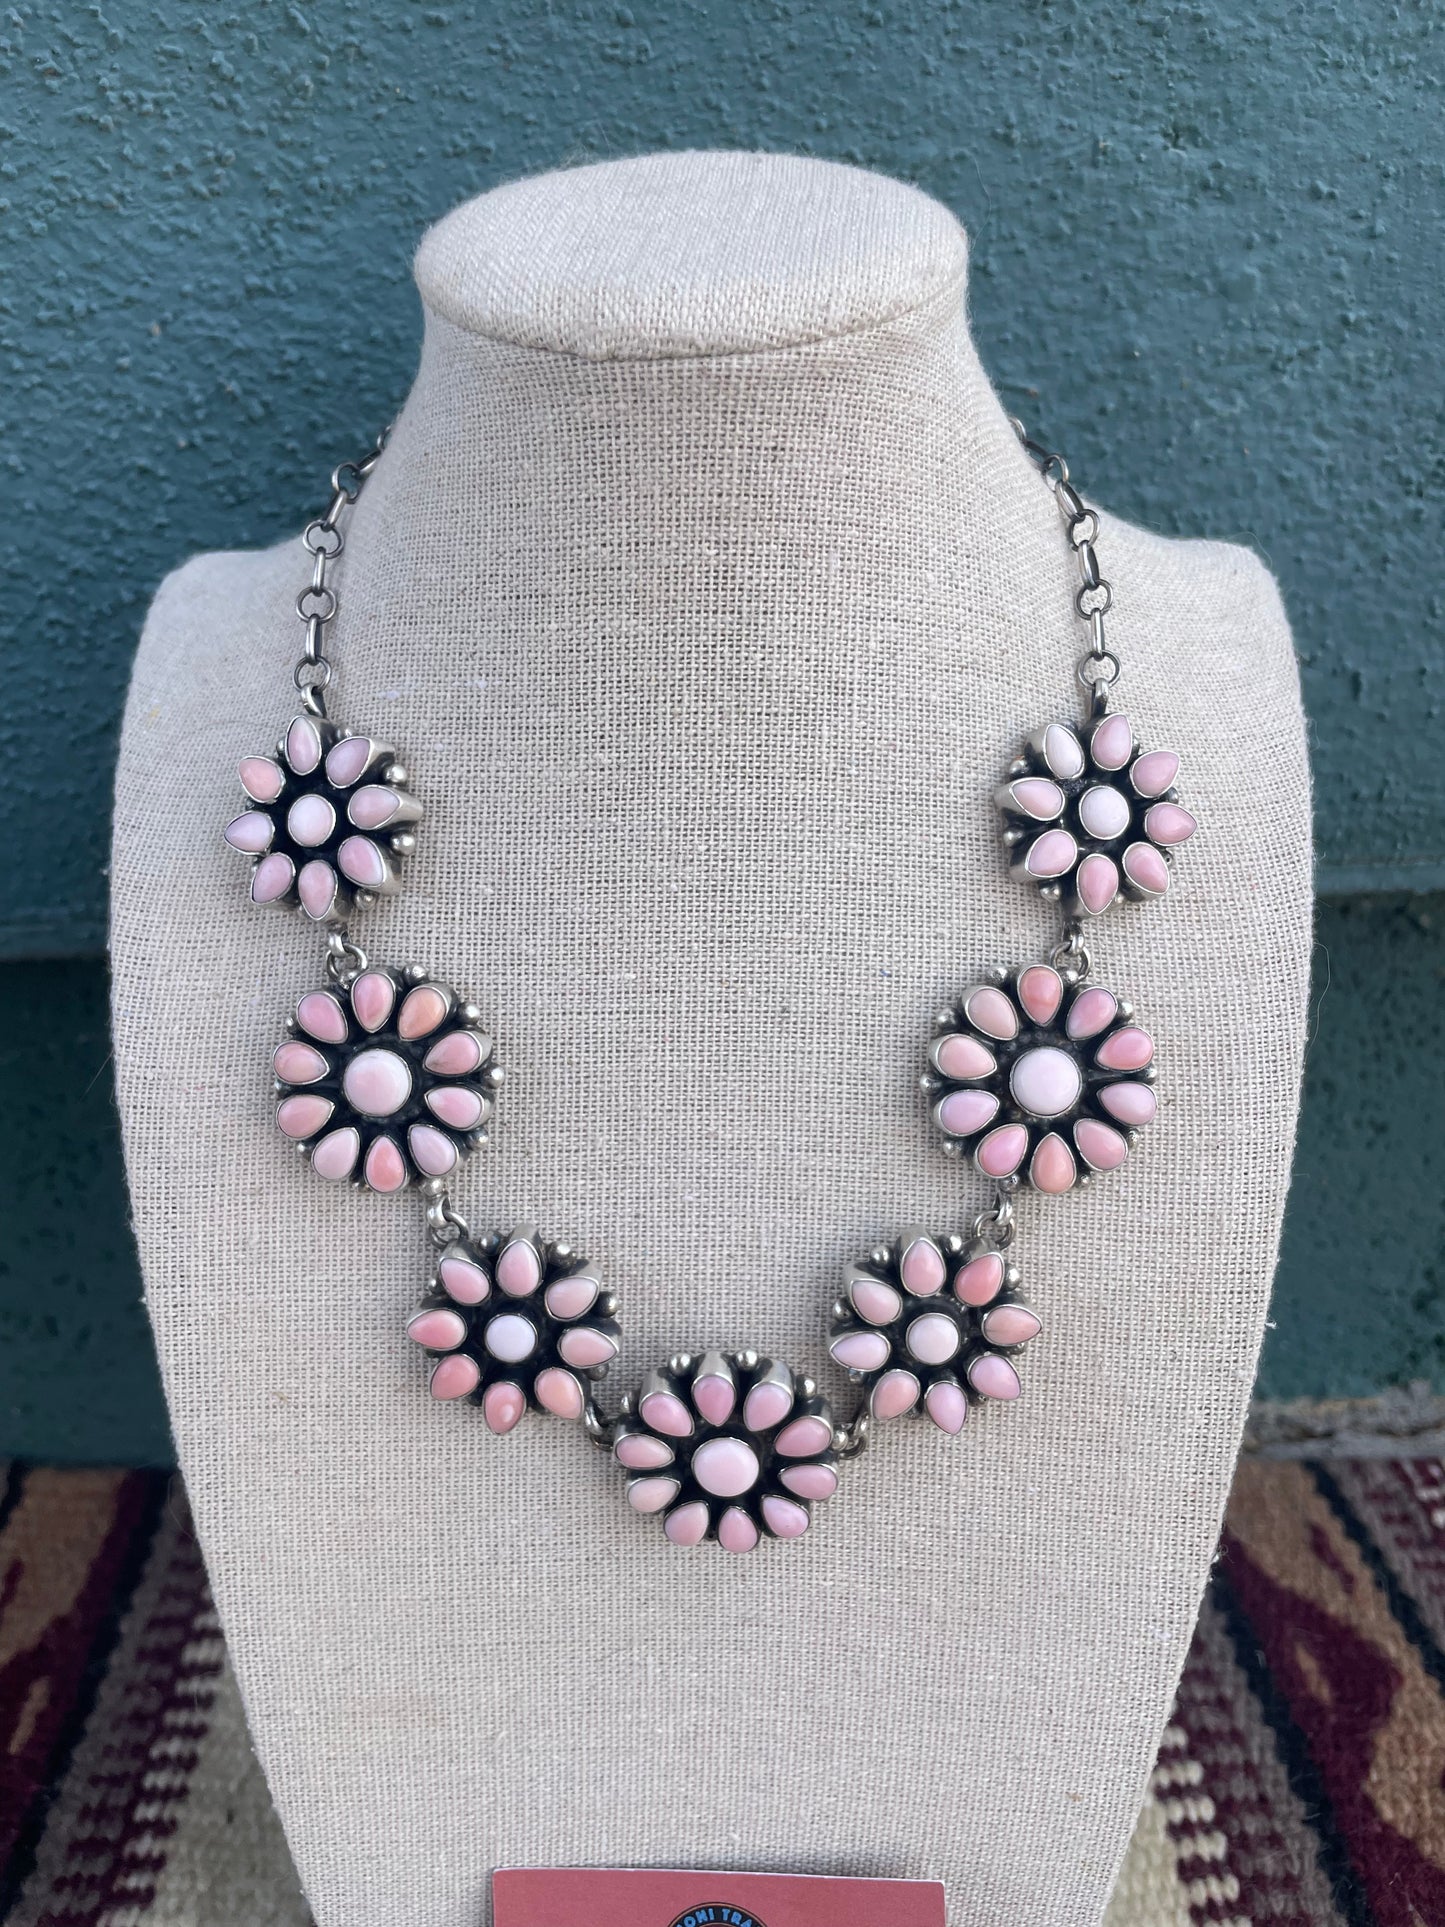 “The Delaney” Navajo Queen Pink Conch Shell And Sterling Silver Necklace Earrings Set Signed